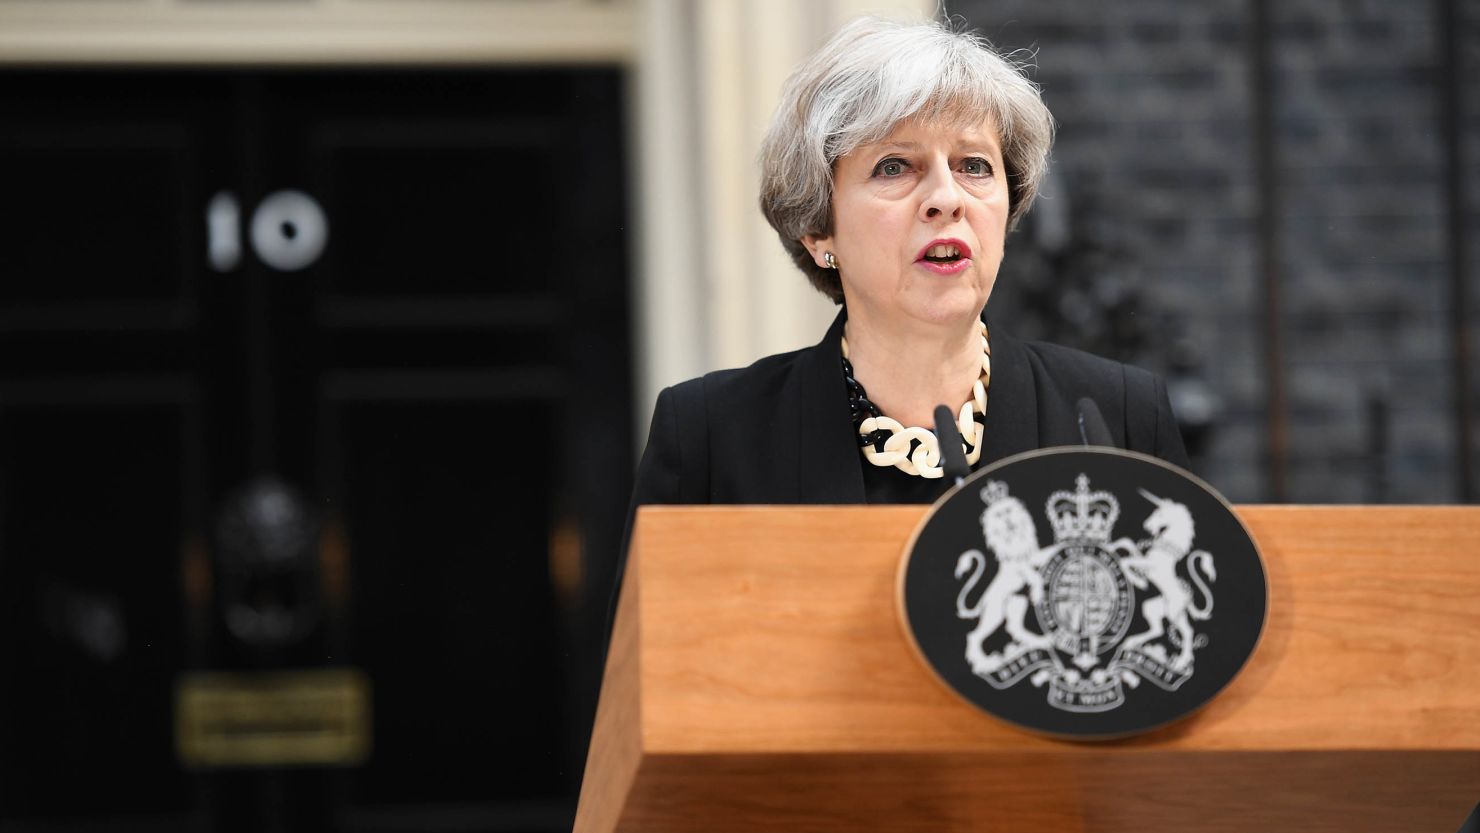 British Prime Minister Theresa May was the alleged target of an assassination plot that was thwarted by security officials.

